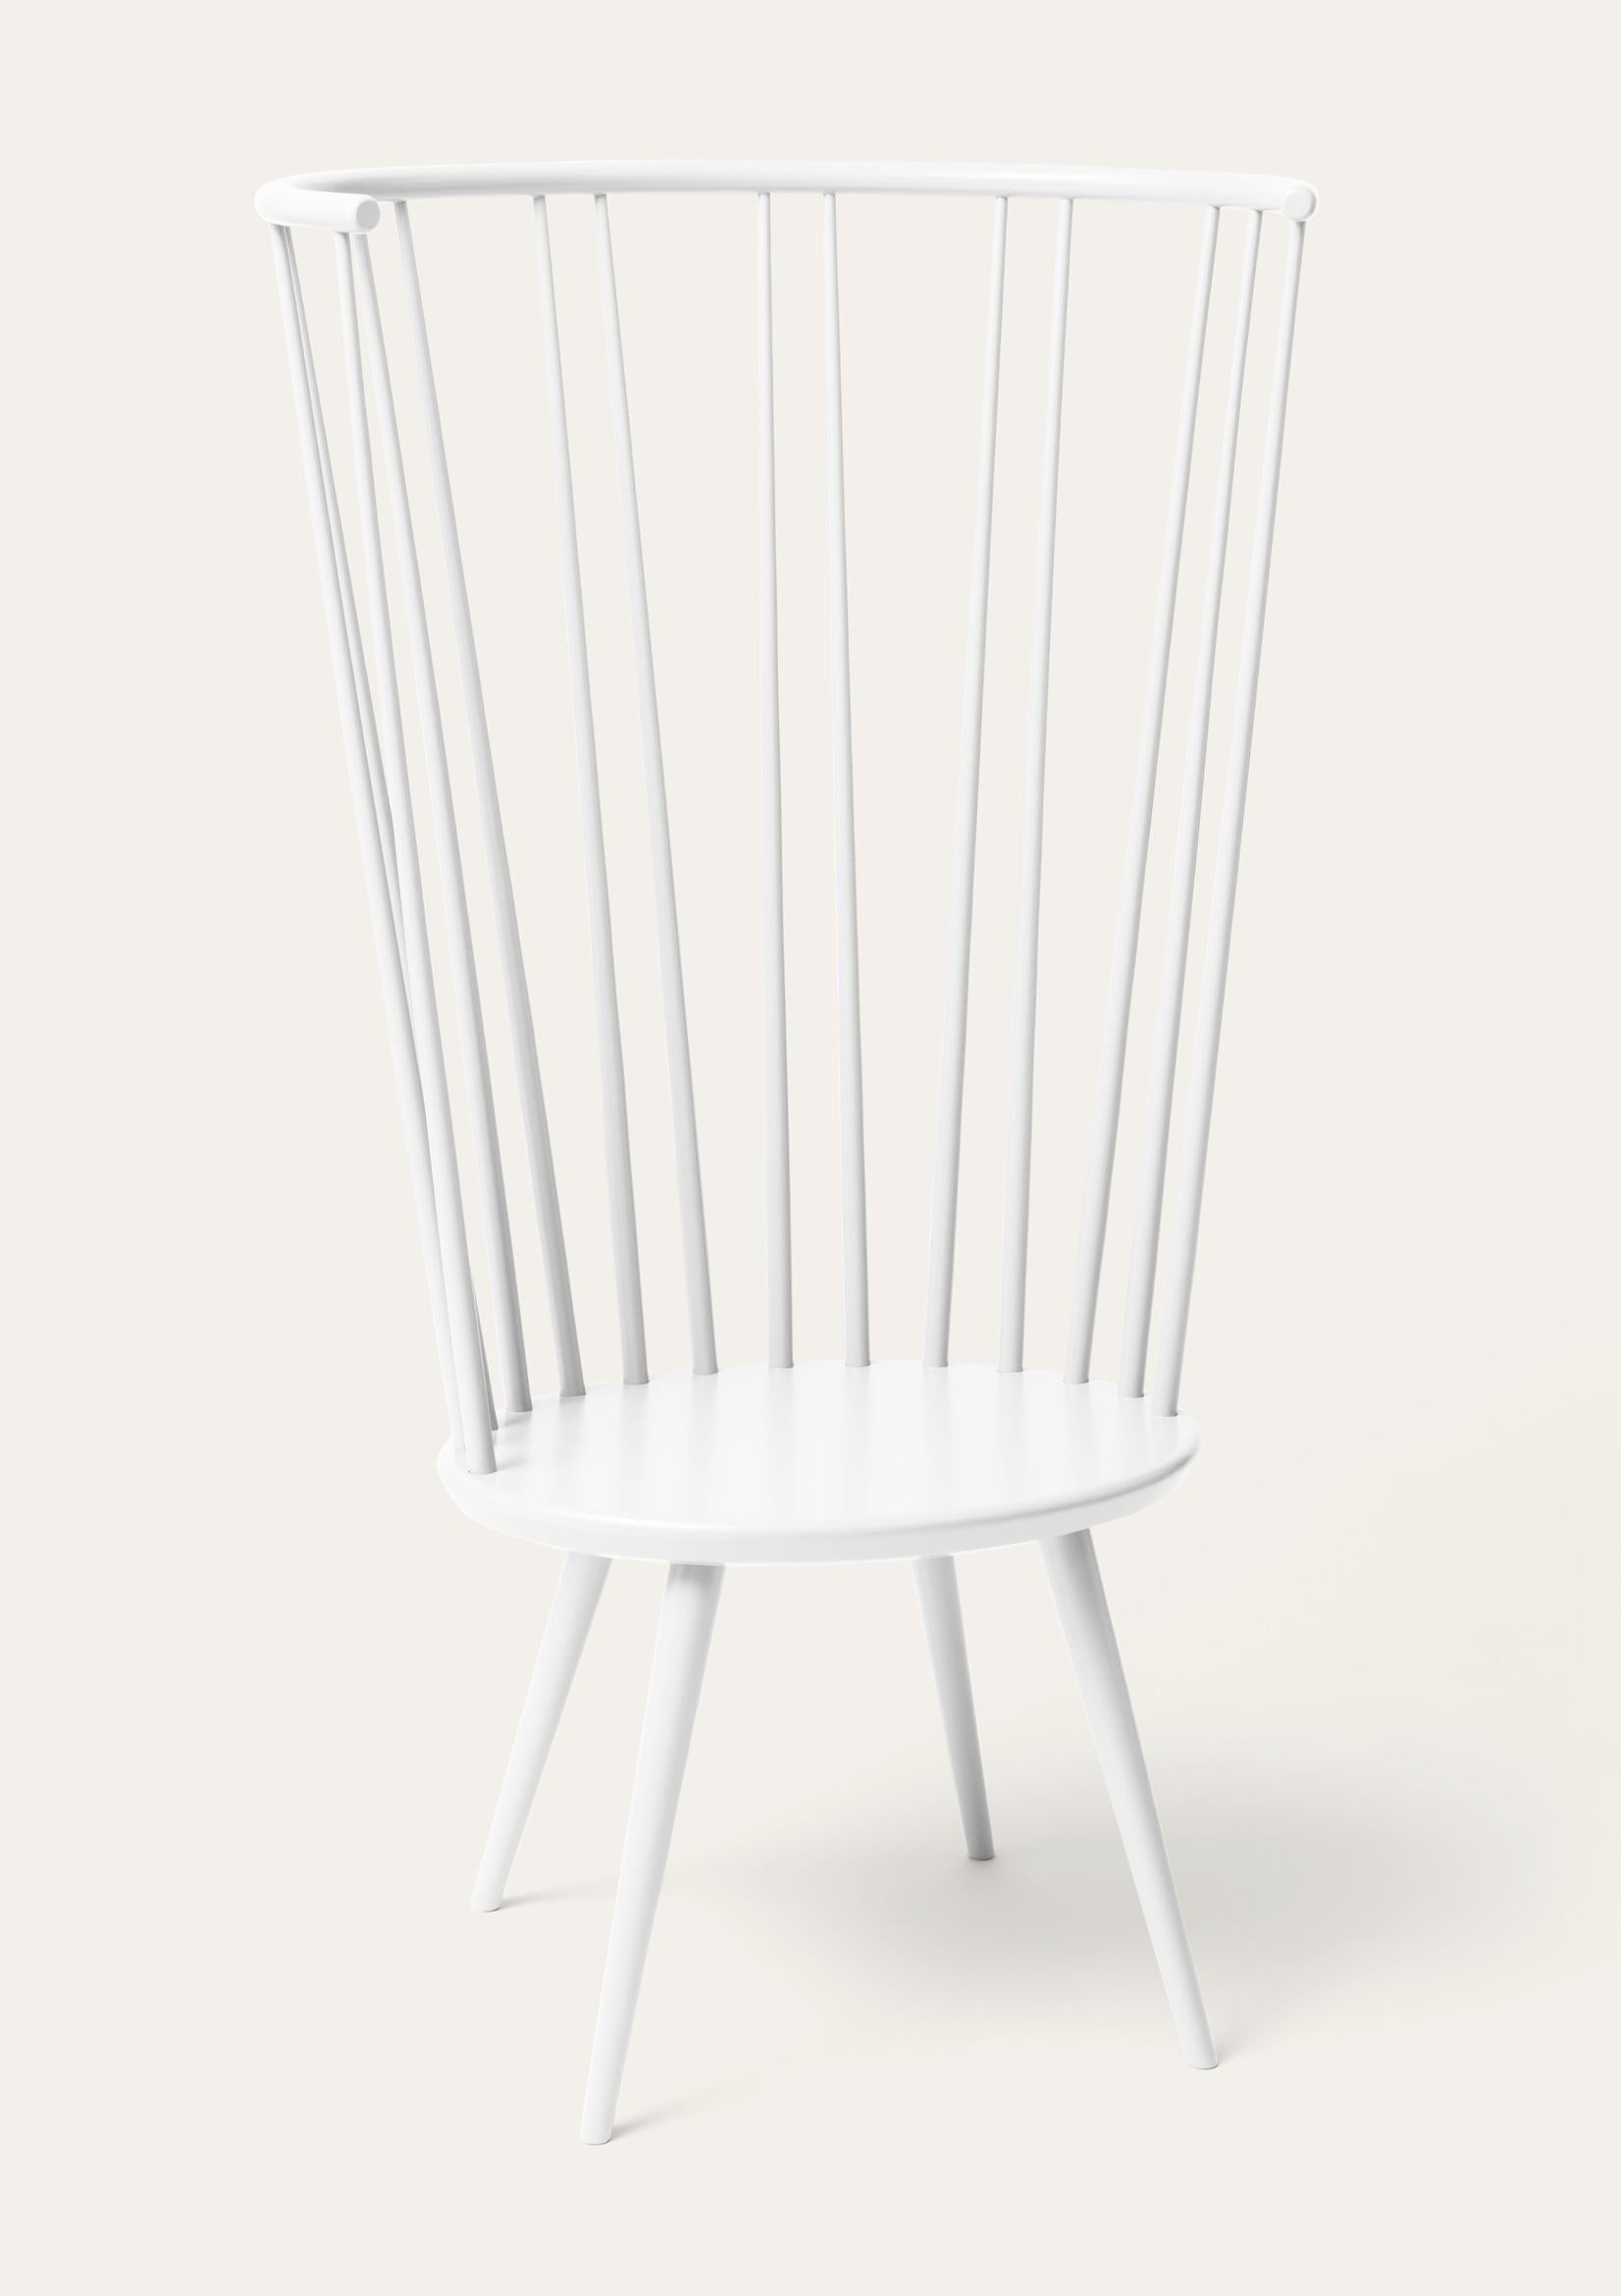 White Storängen birch chair by Storängen Design
Dimensions: D 56 x W 78 x H 133 x SH 42 cm
Materials: birch wood
Also available in other colors, with seat and back cushion.

The Storängen chair epitomizes our belief in the honesty of